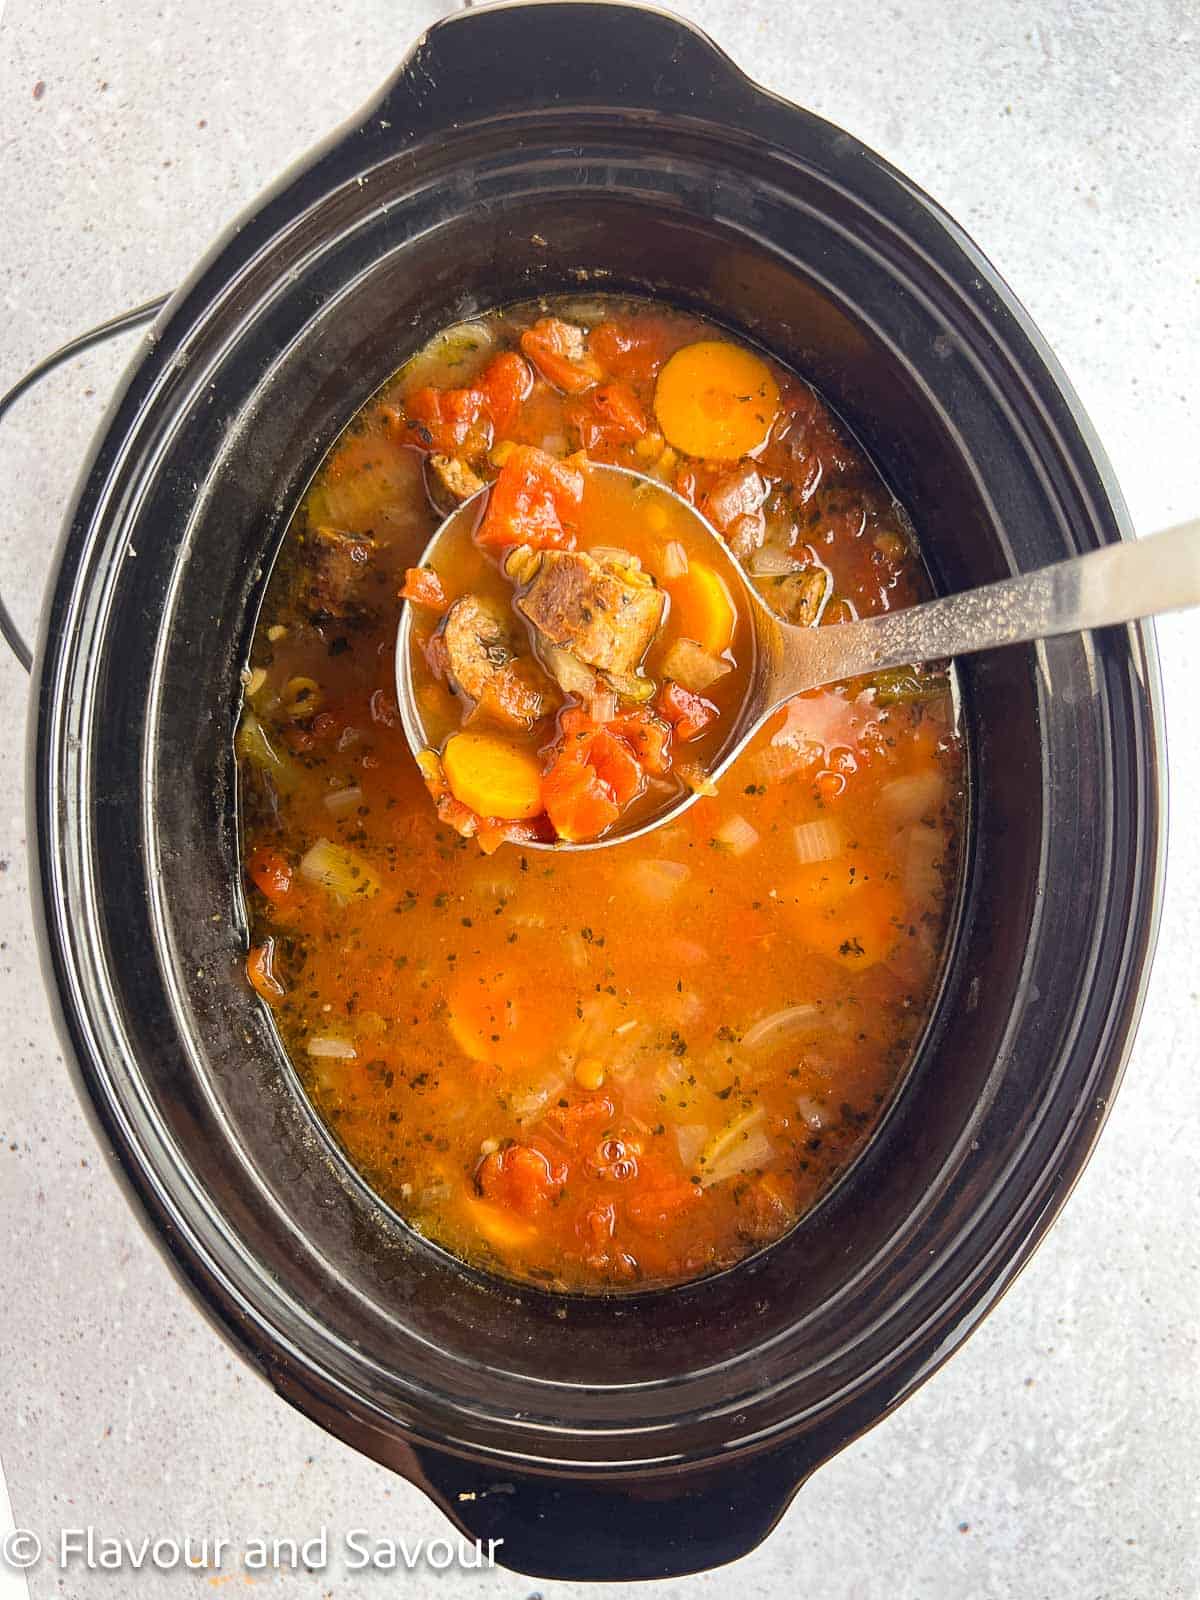 Lentil and sausage stew, cooked, in a slow cooker.